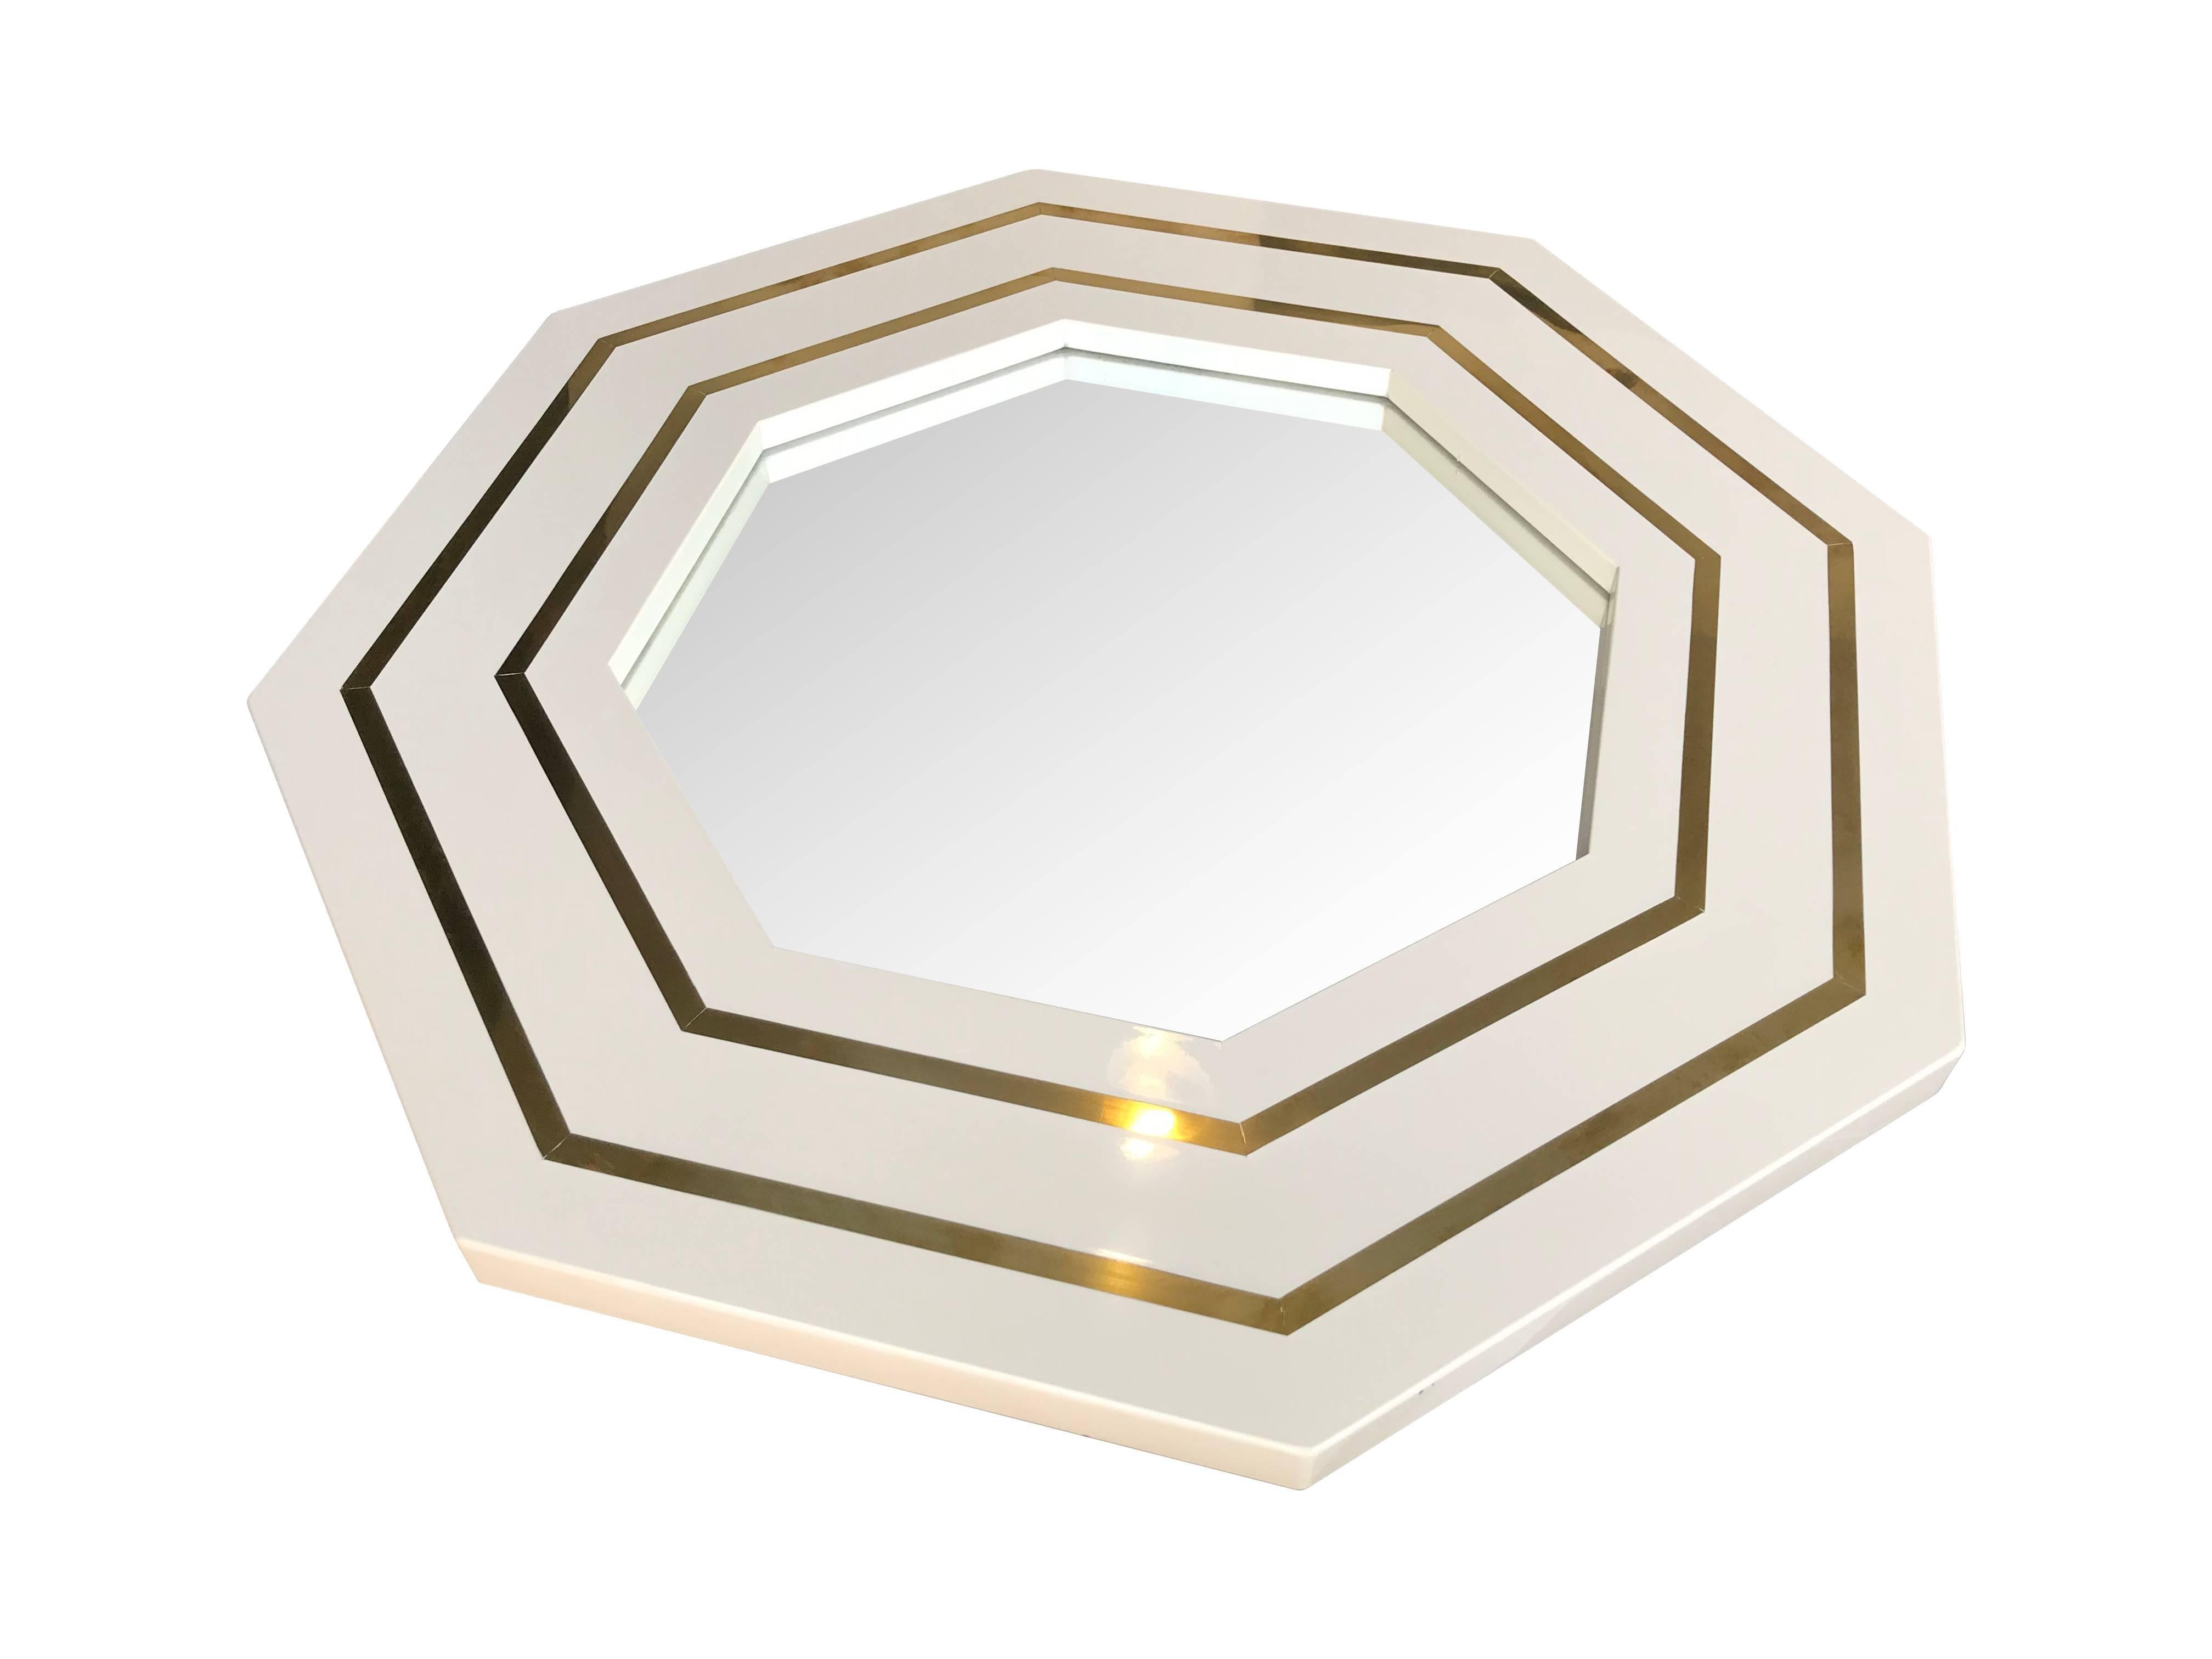 A Jean Claude Mahey octagonal mirror with ivory lacquer and brass inlay surround.